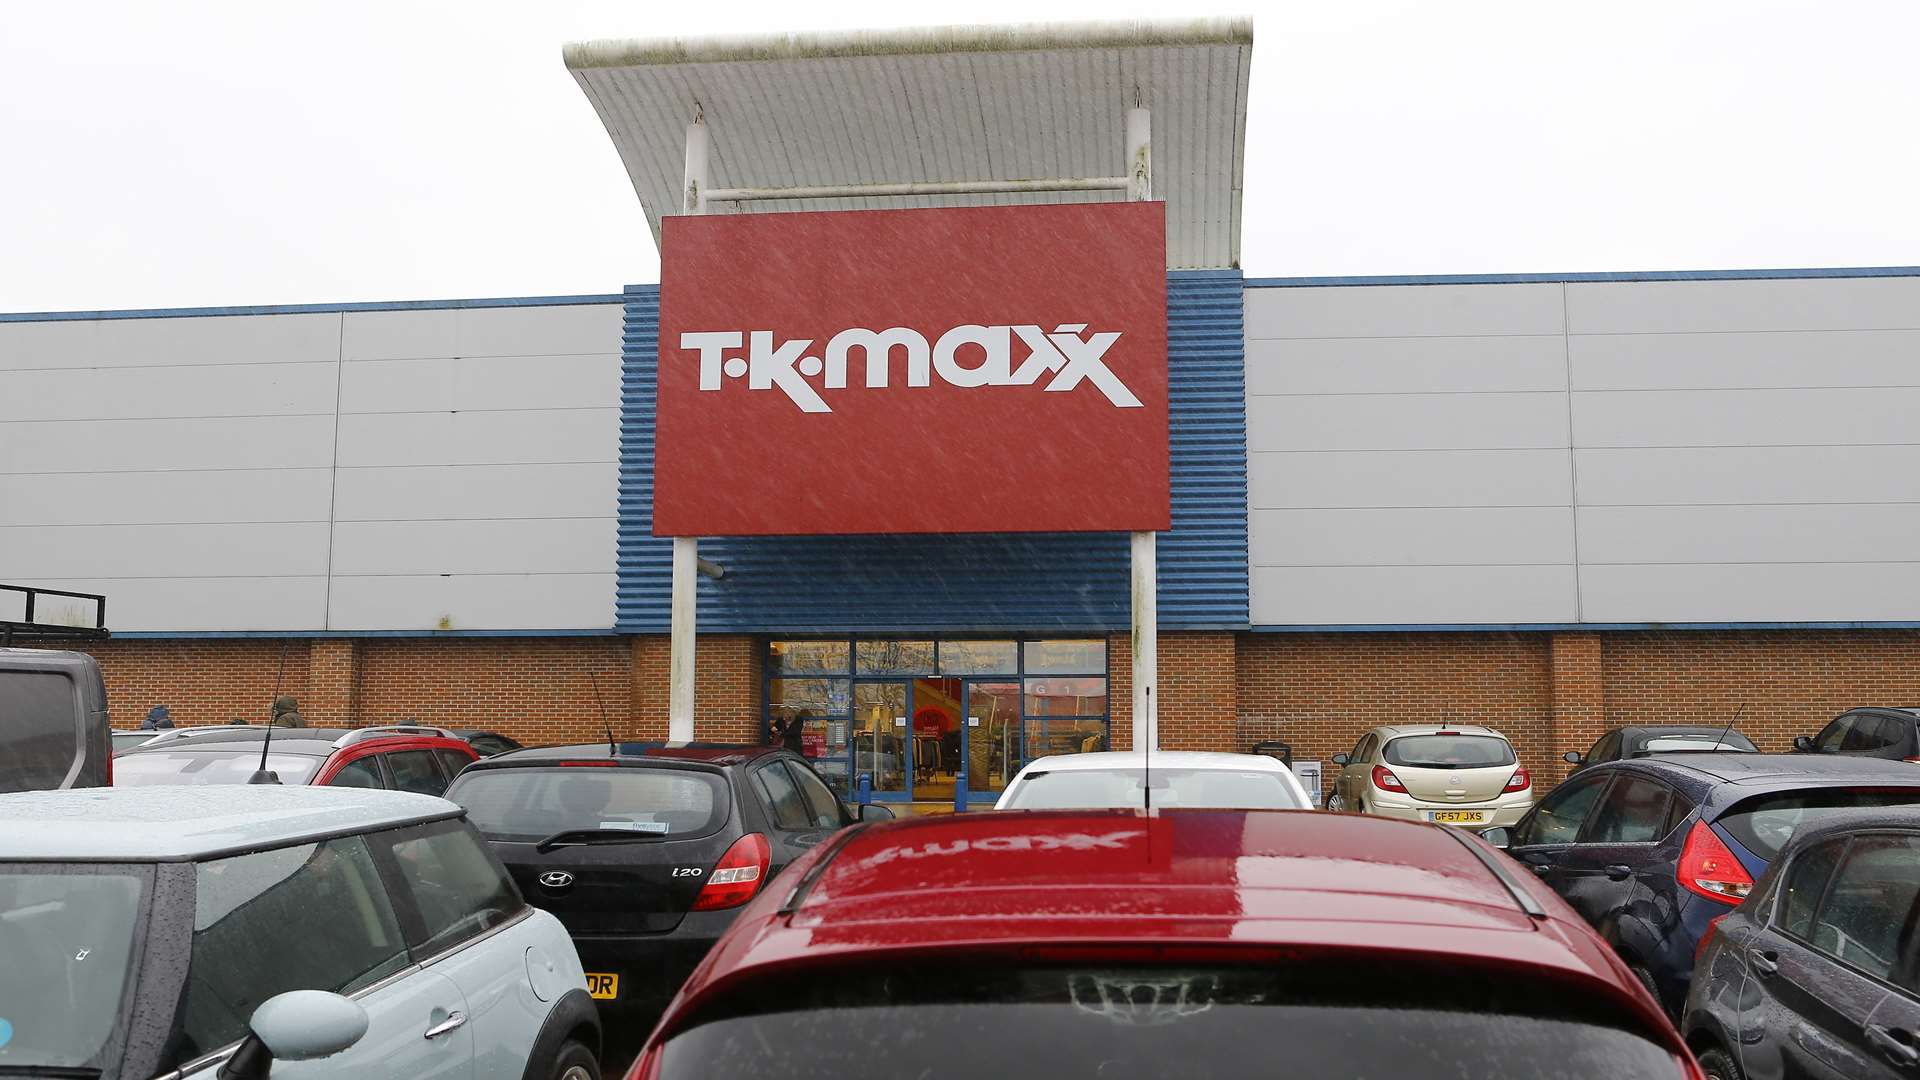 TK Maxx is one of the shops on the Ashford Retail Park